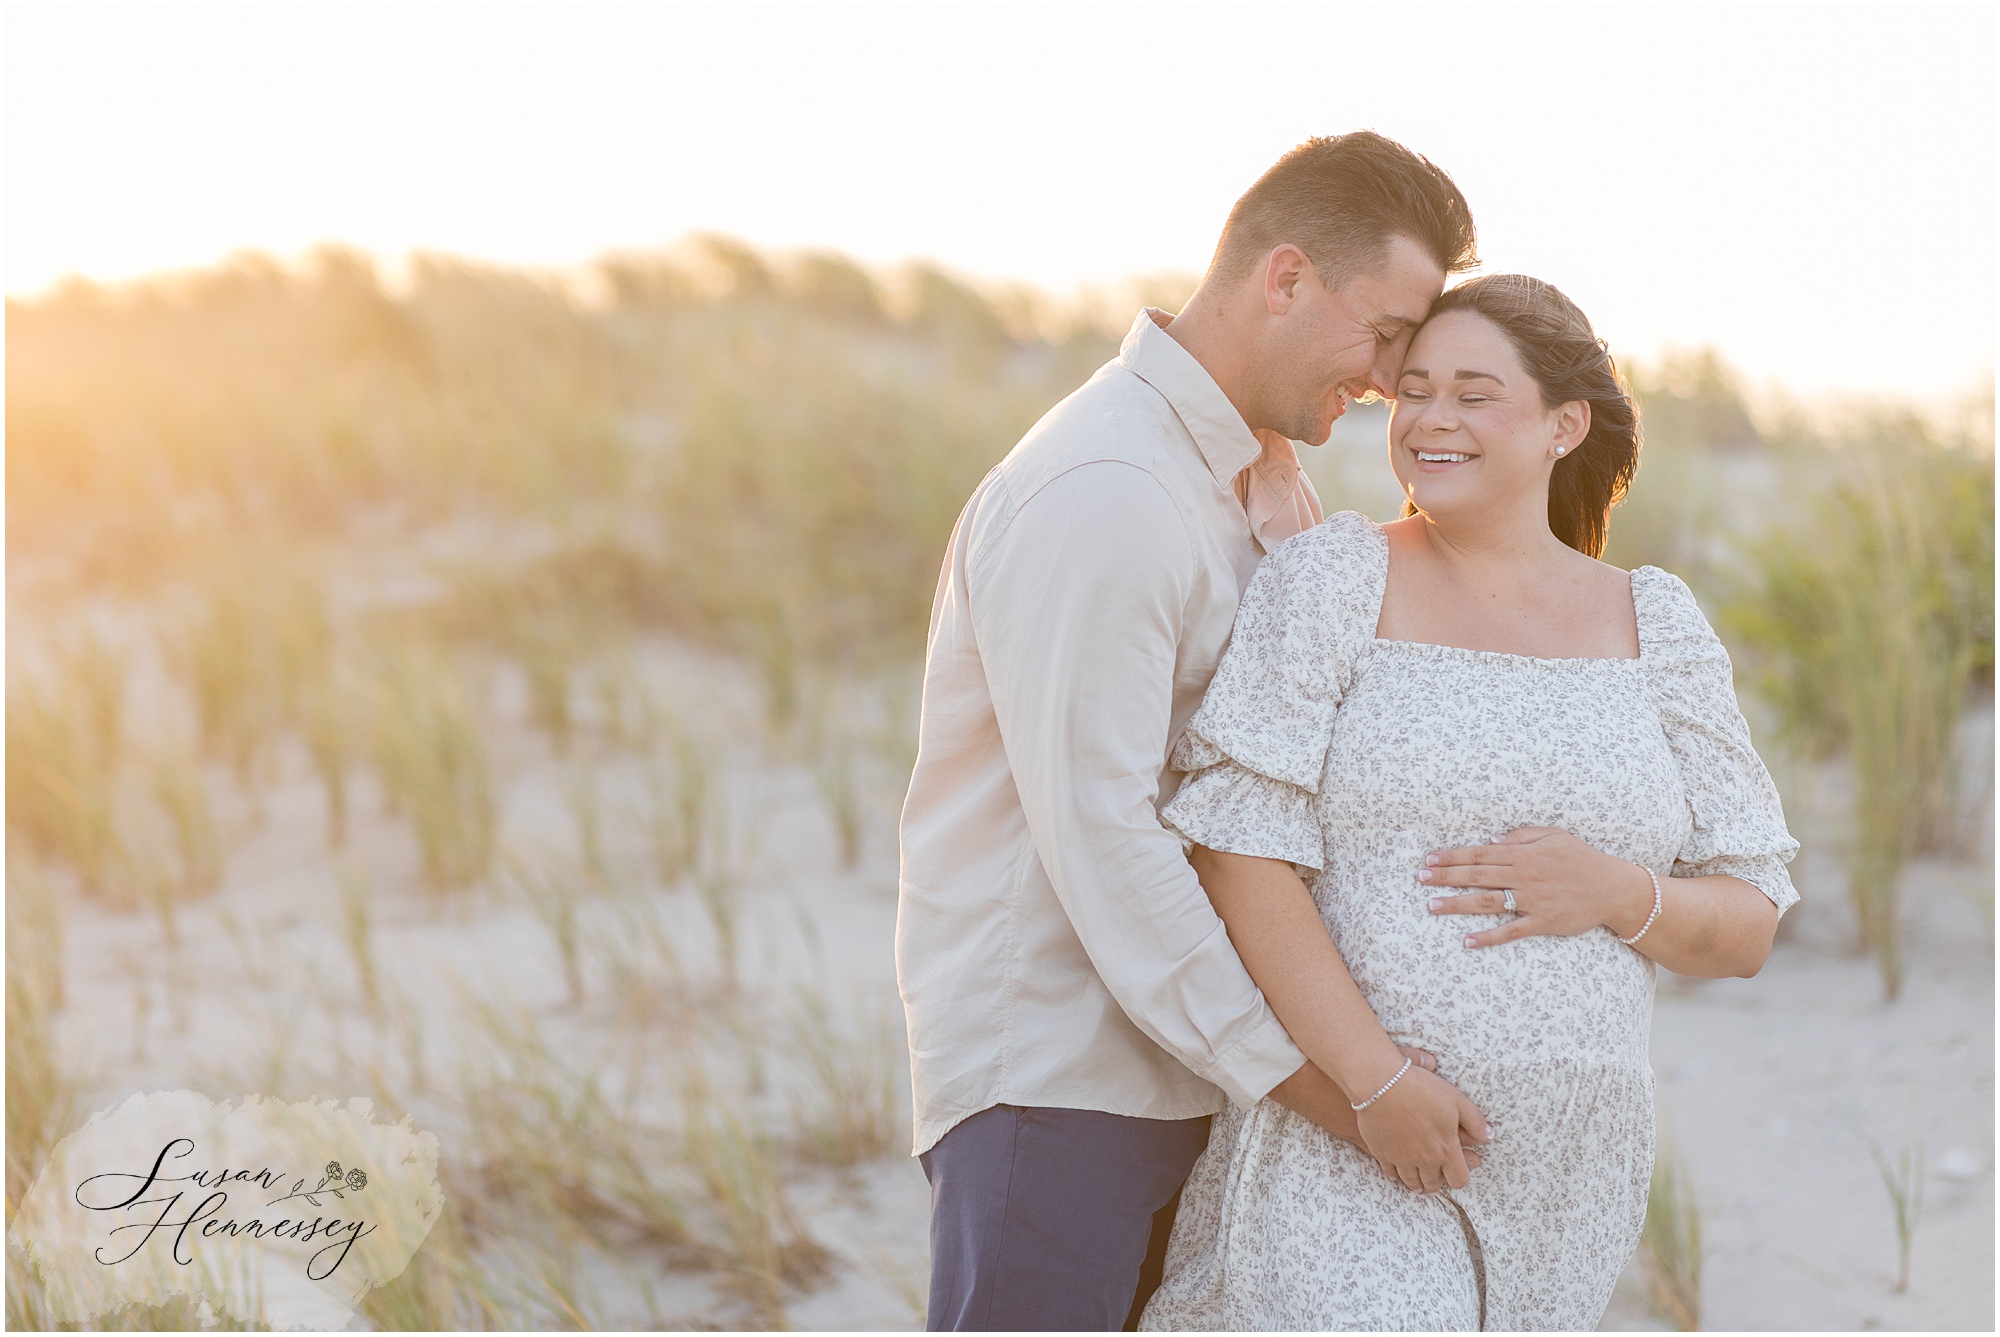 Jersey shore beacj Maternity Session photographed by Susan Hennessey Photography, South Jersey newborn photographer